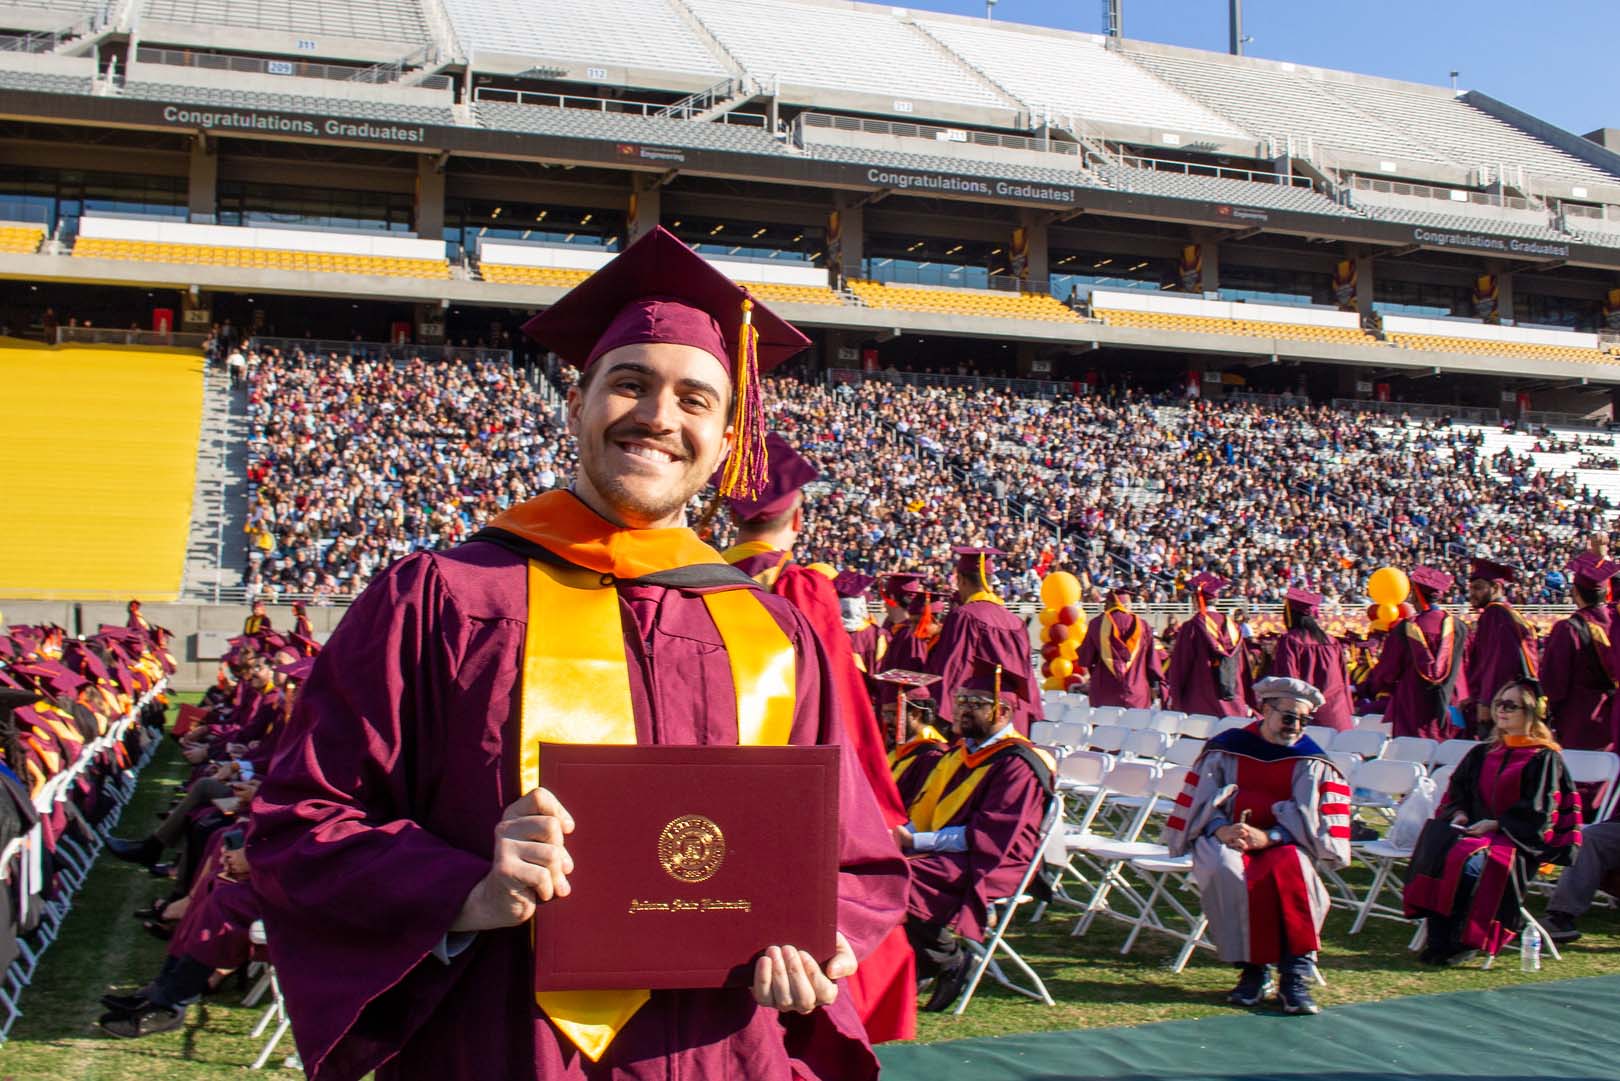 A master's graduate holds his diploma on the field at Sun Devil Stadium during the Fulton Schools Convocation ceremony.